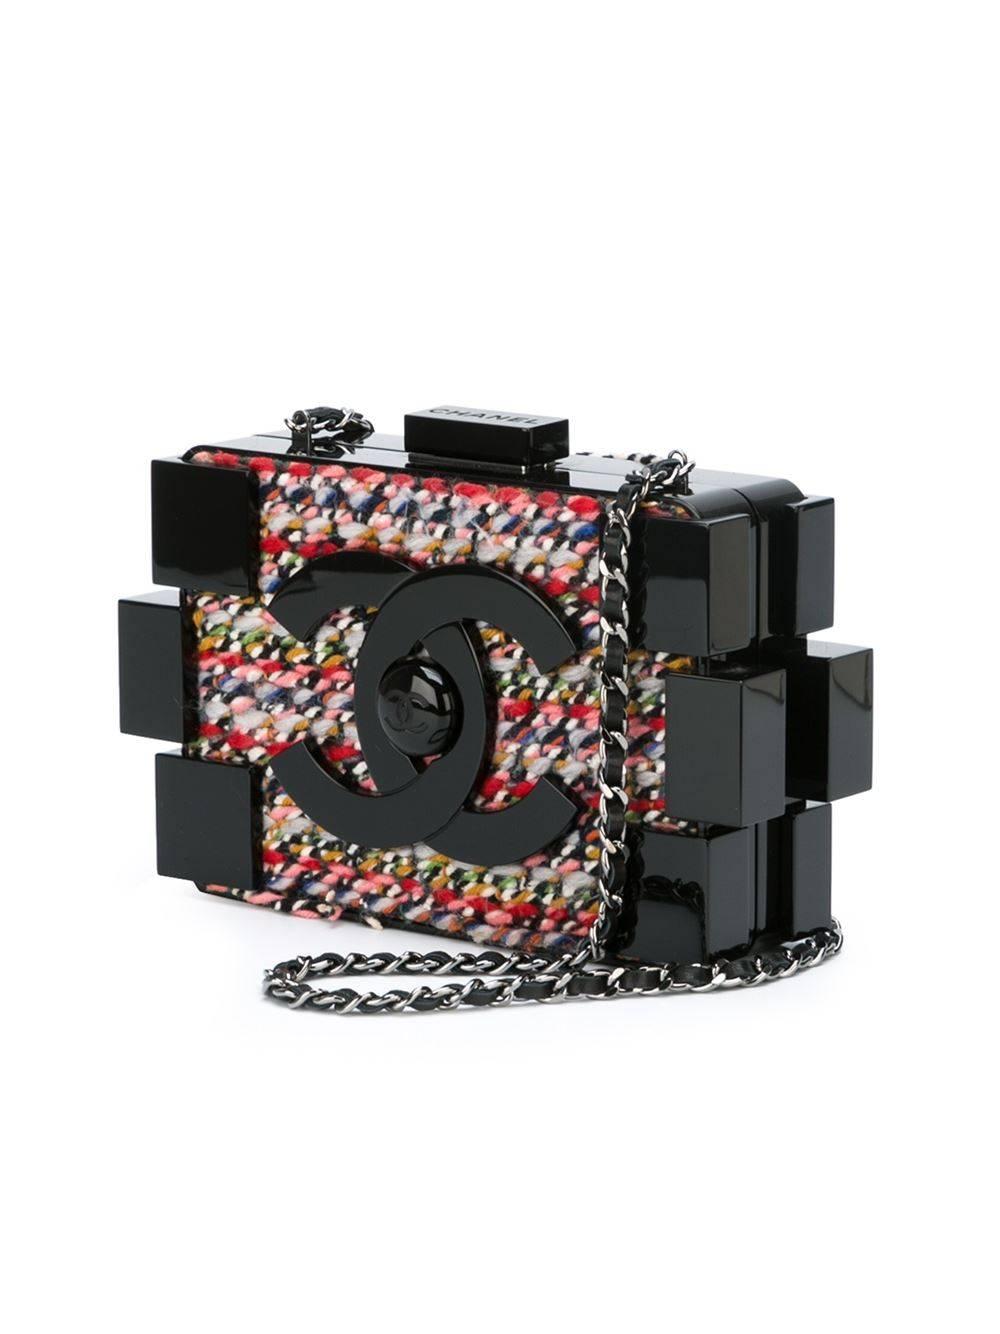 Black wool and plexiglass 'Lego' crossbody bag from Chanel Vintage featuring a top clasp fastening, a chain and leather strap, an internal zipped pocket, an internal logo stamp and multicoloured tweed panel.

Colour: Black, multi

Material: